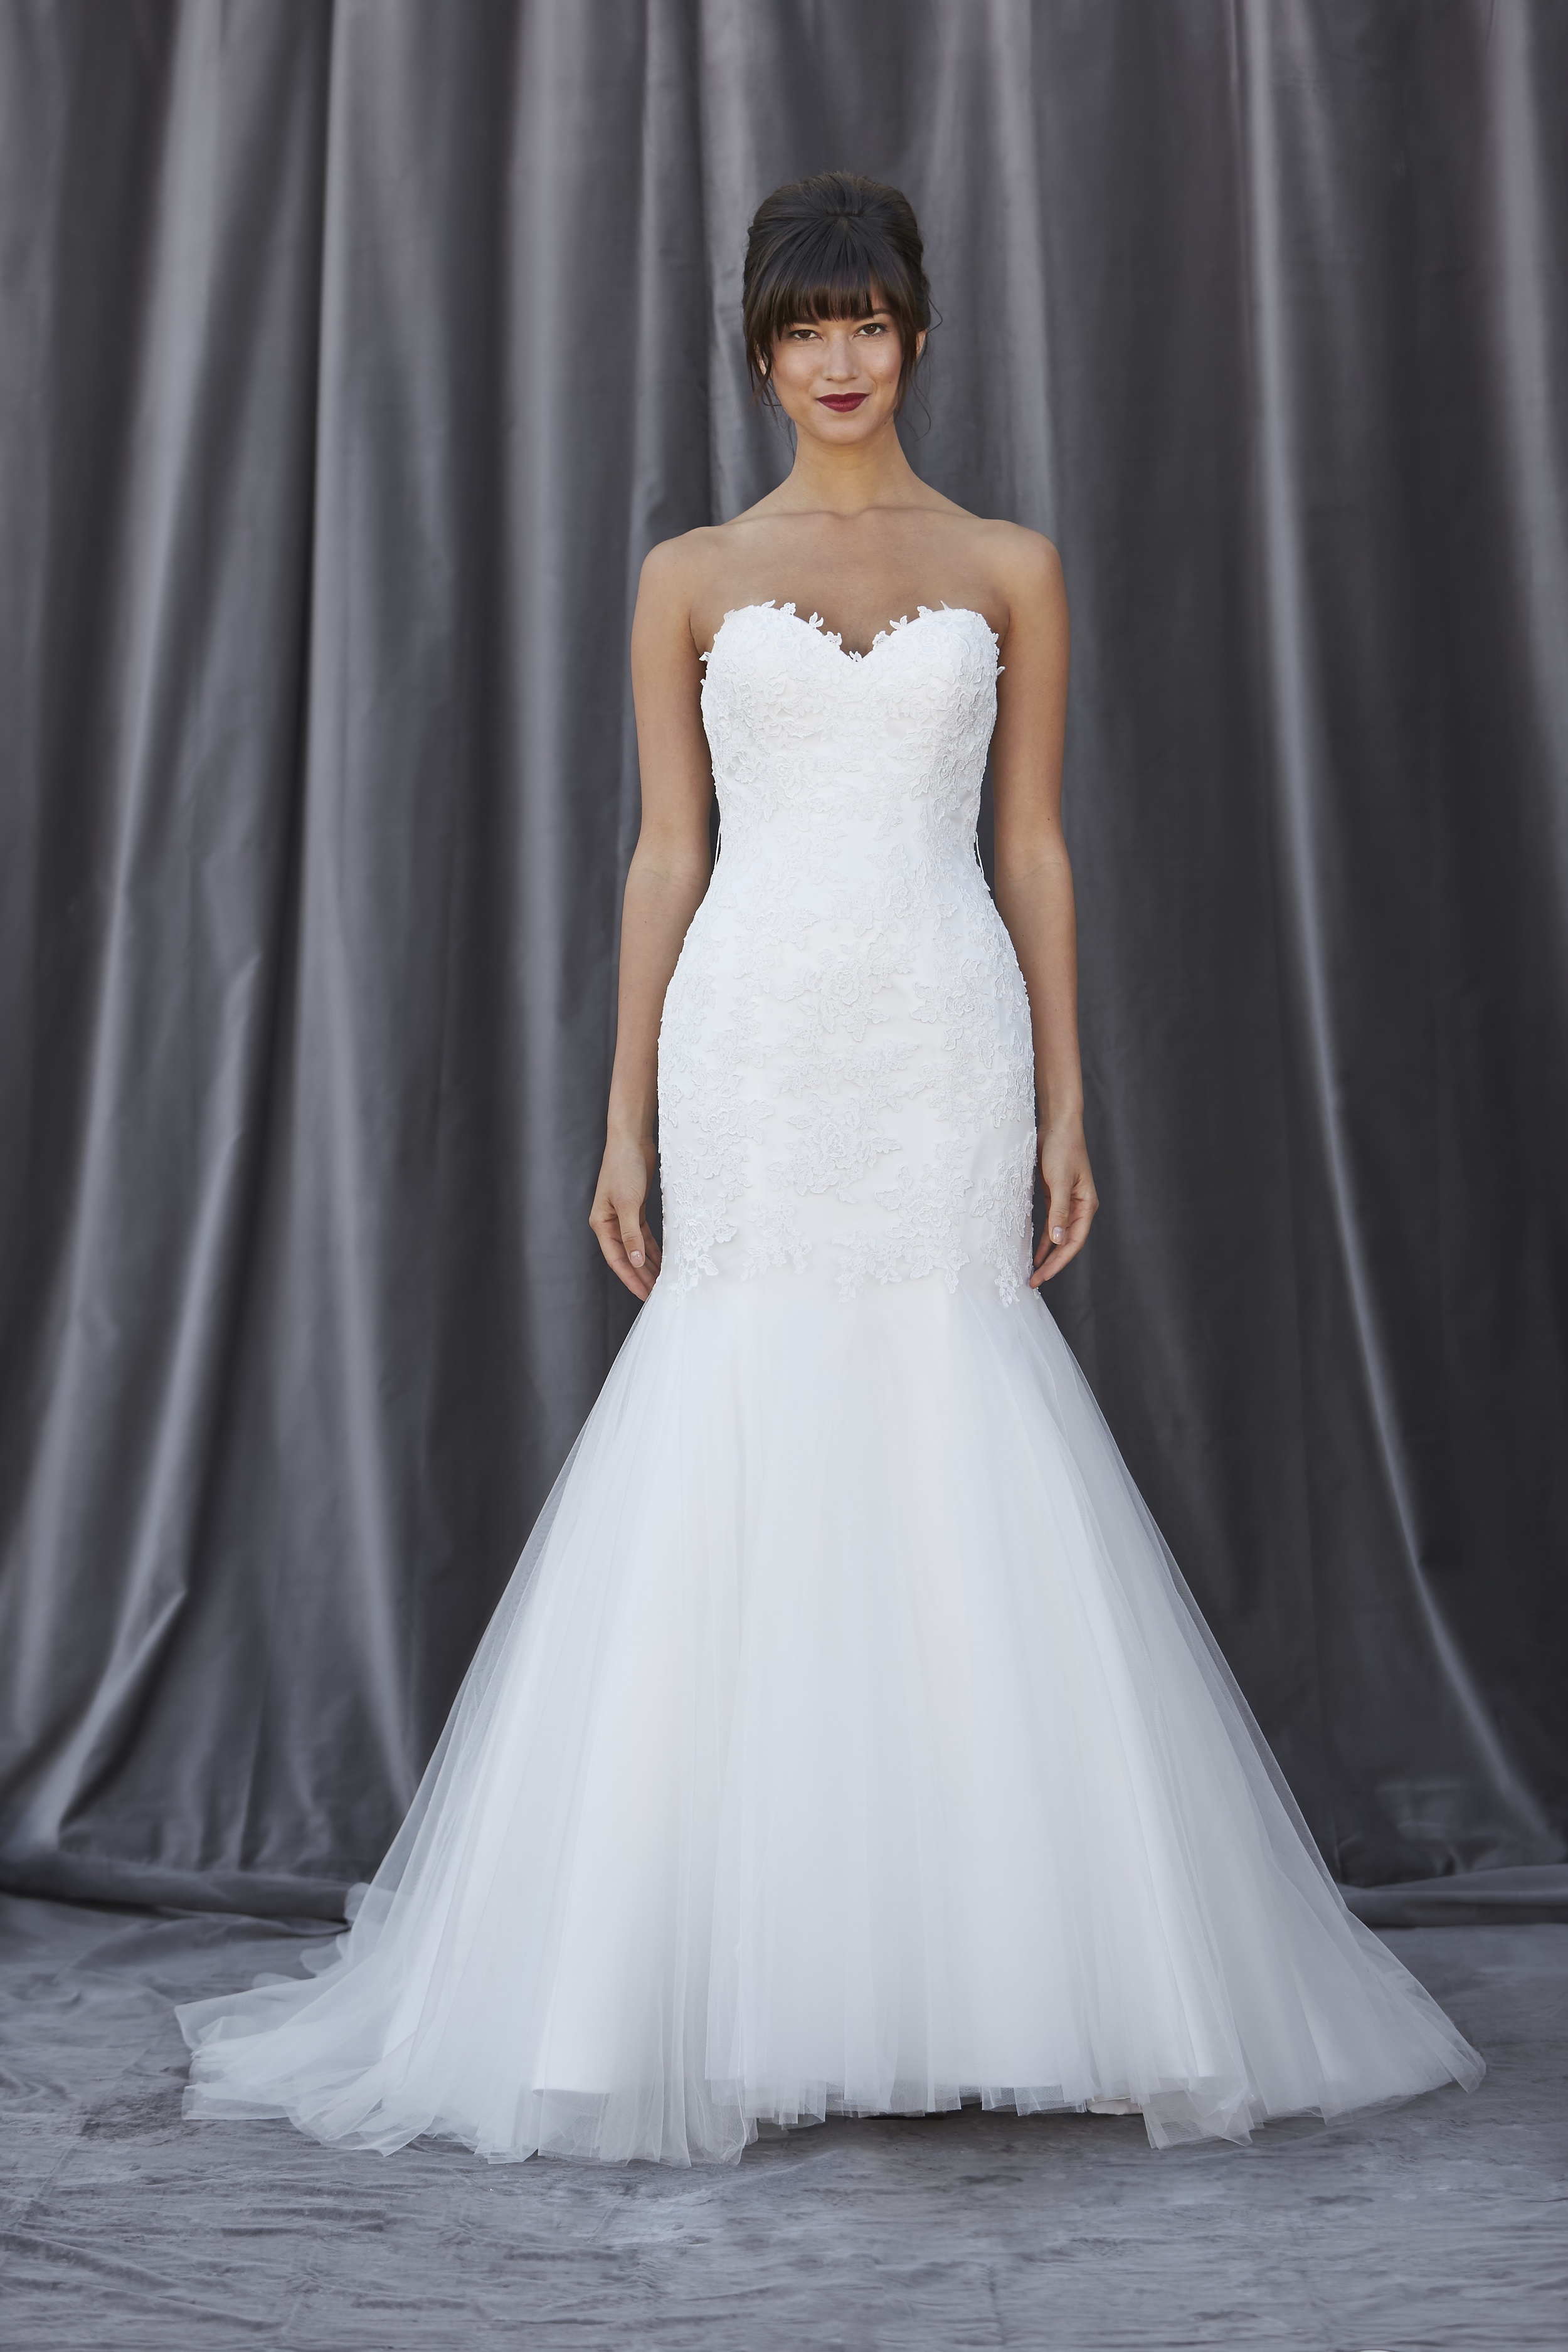 New Marchesa Wedding Gowns at Little White Dress! — LWD